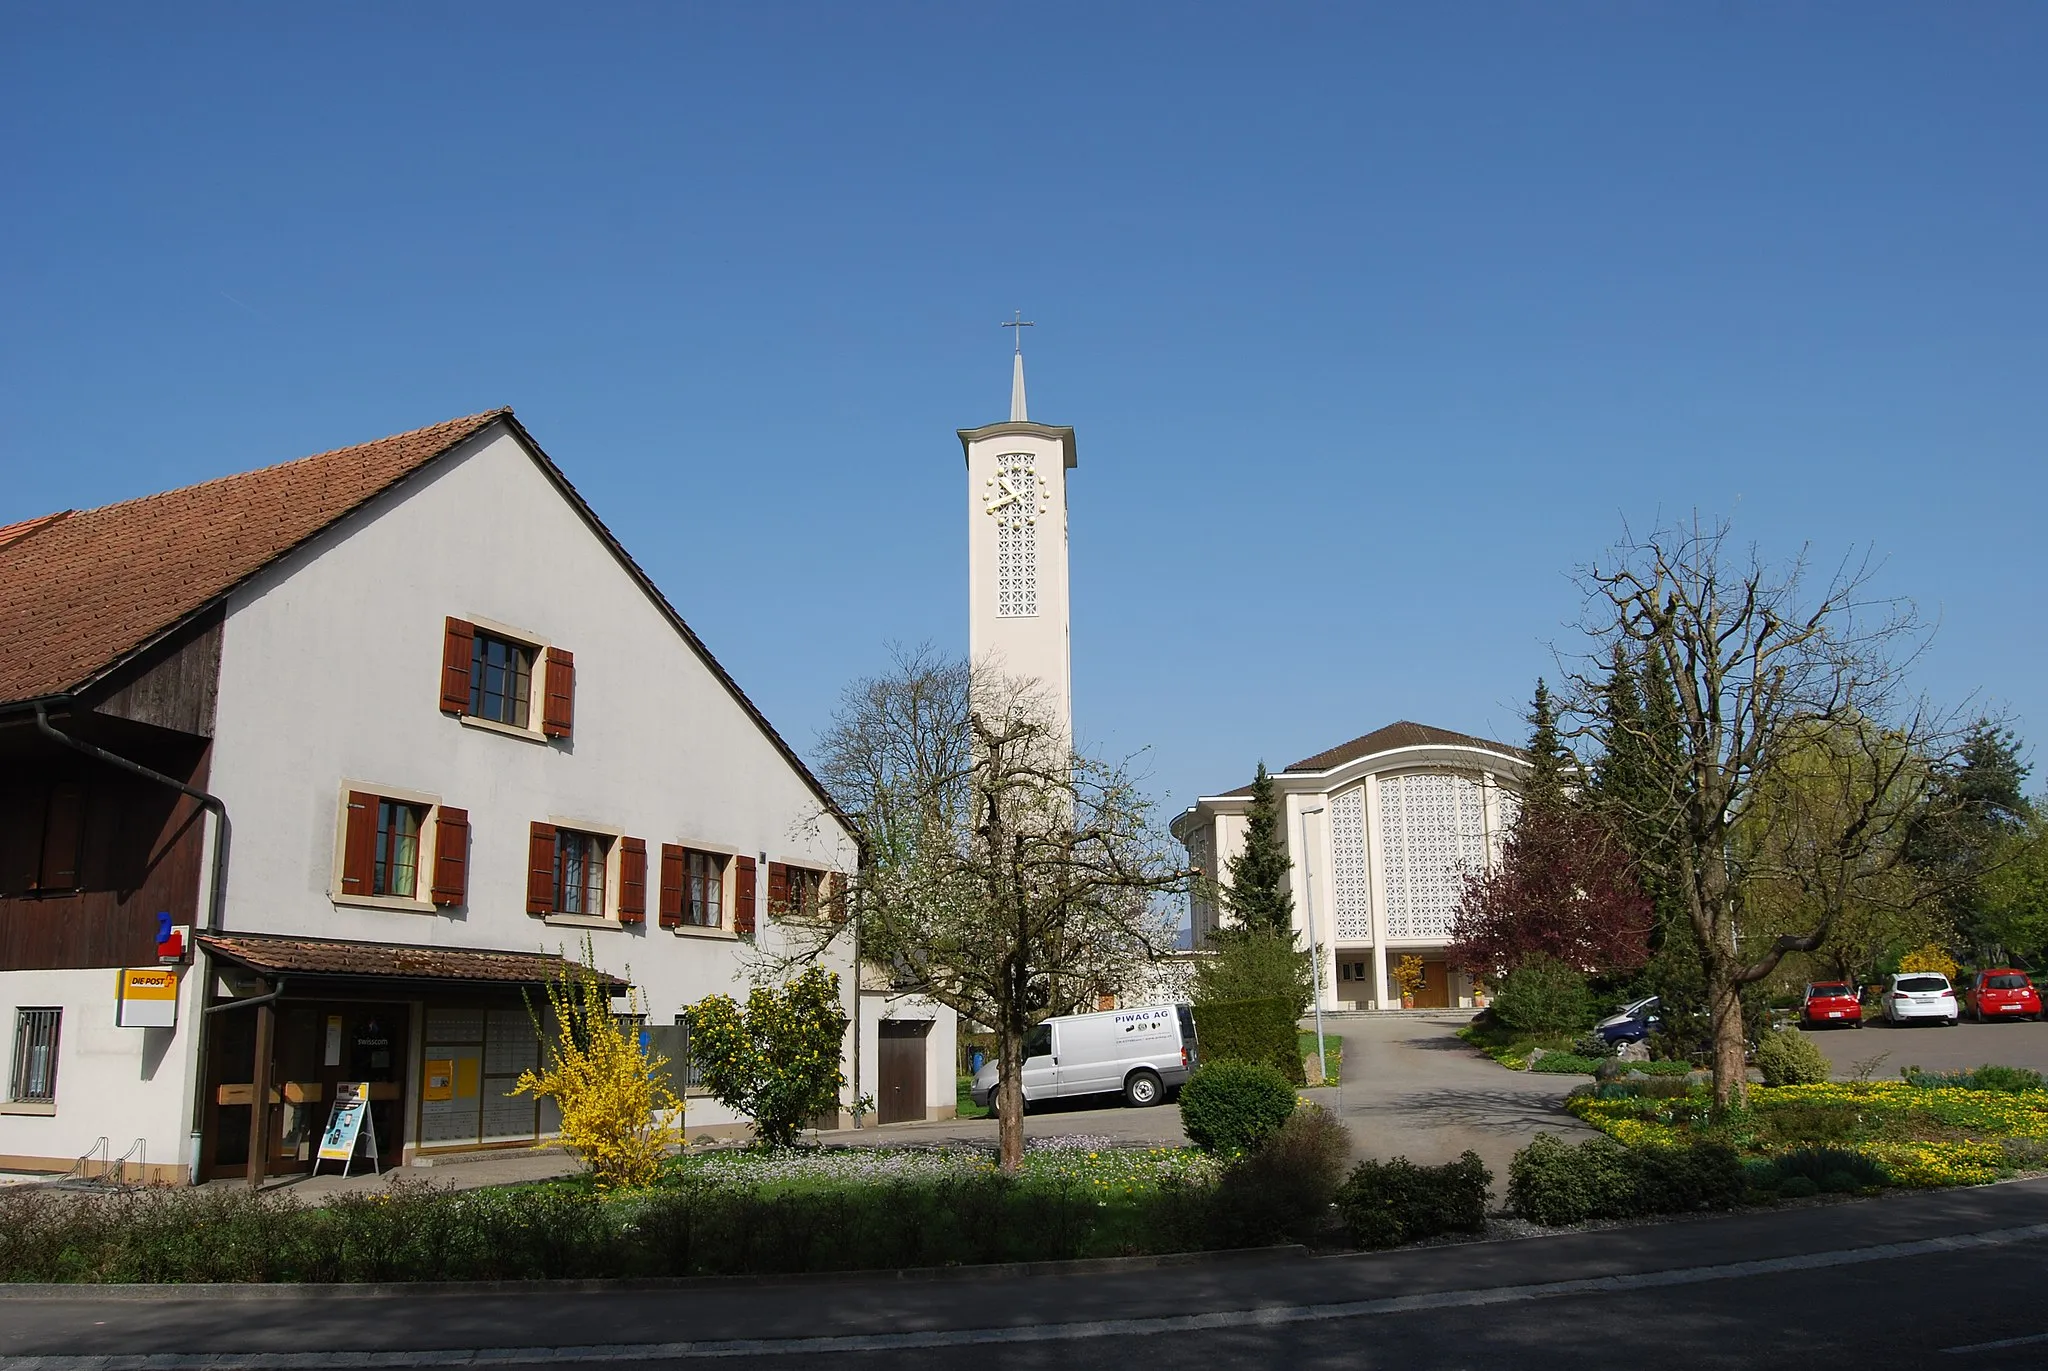 Photo showing: Post office and church of Fulenbach, canton of Solothurn, Switzerland